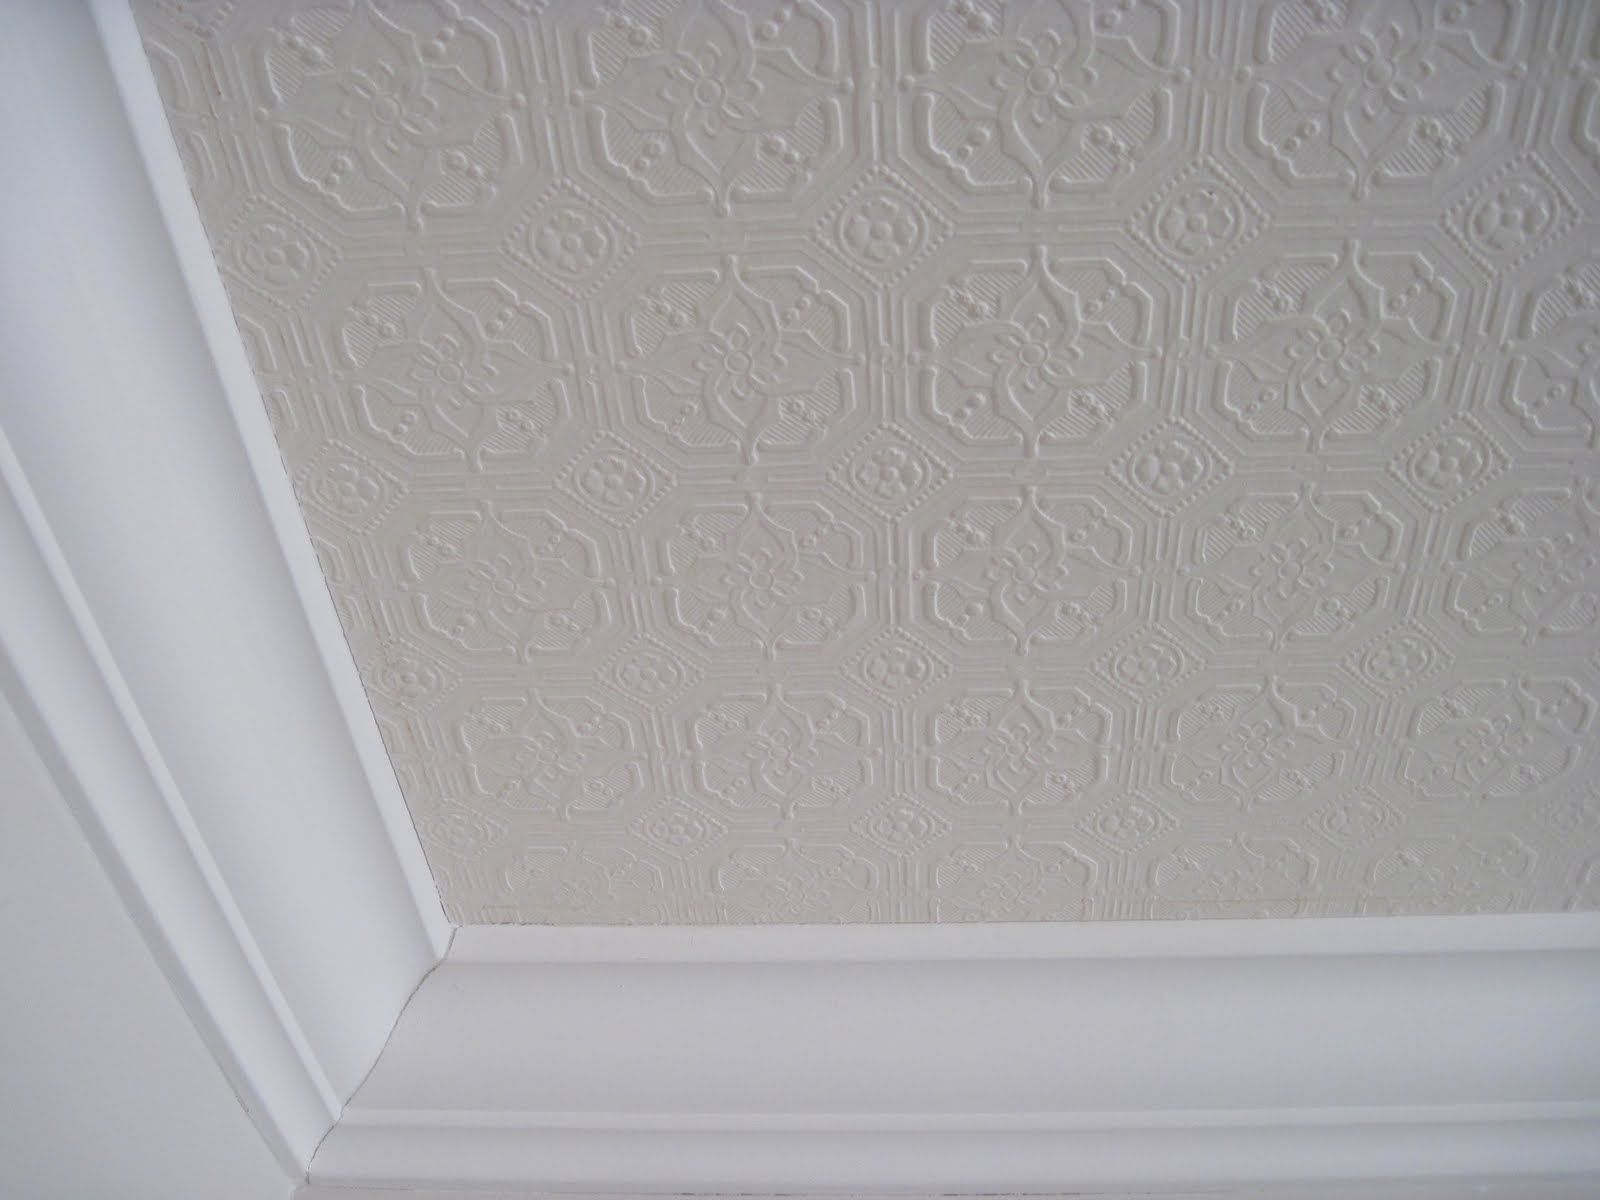 paintable textured wallpaper,ceiling,molding,wall,plaster,material property